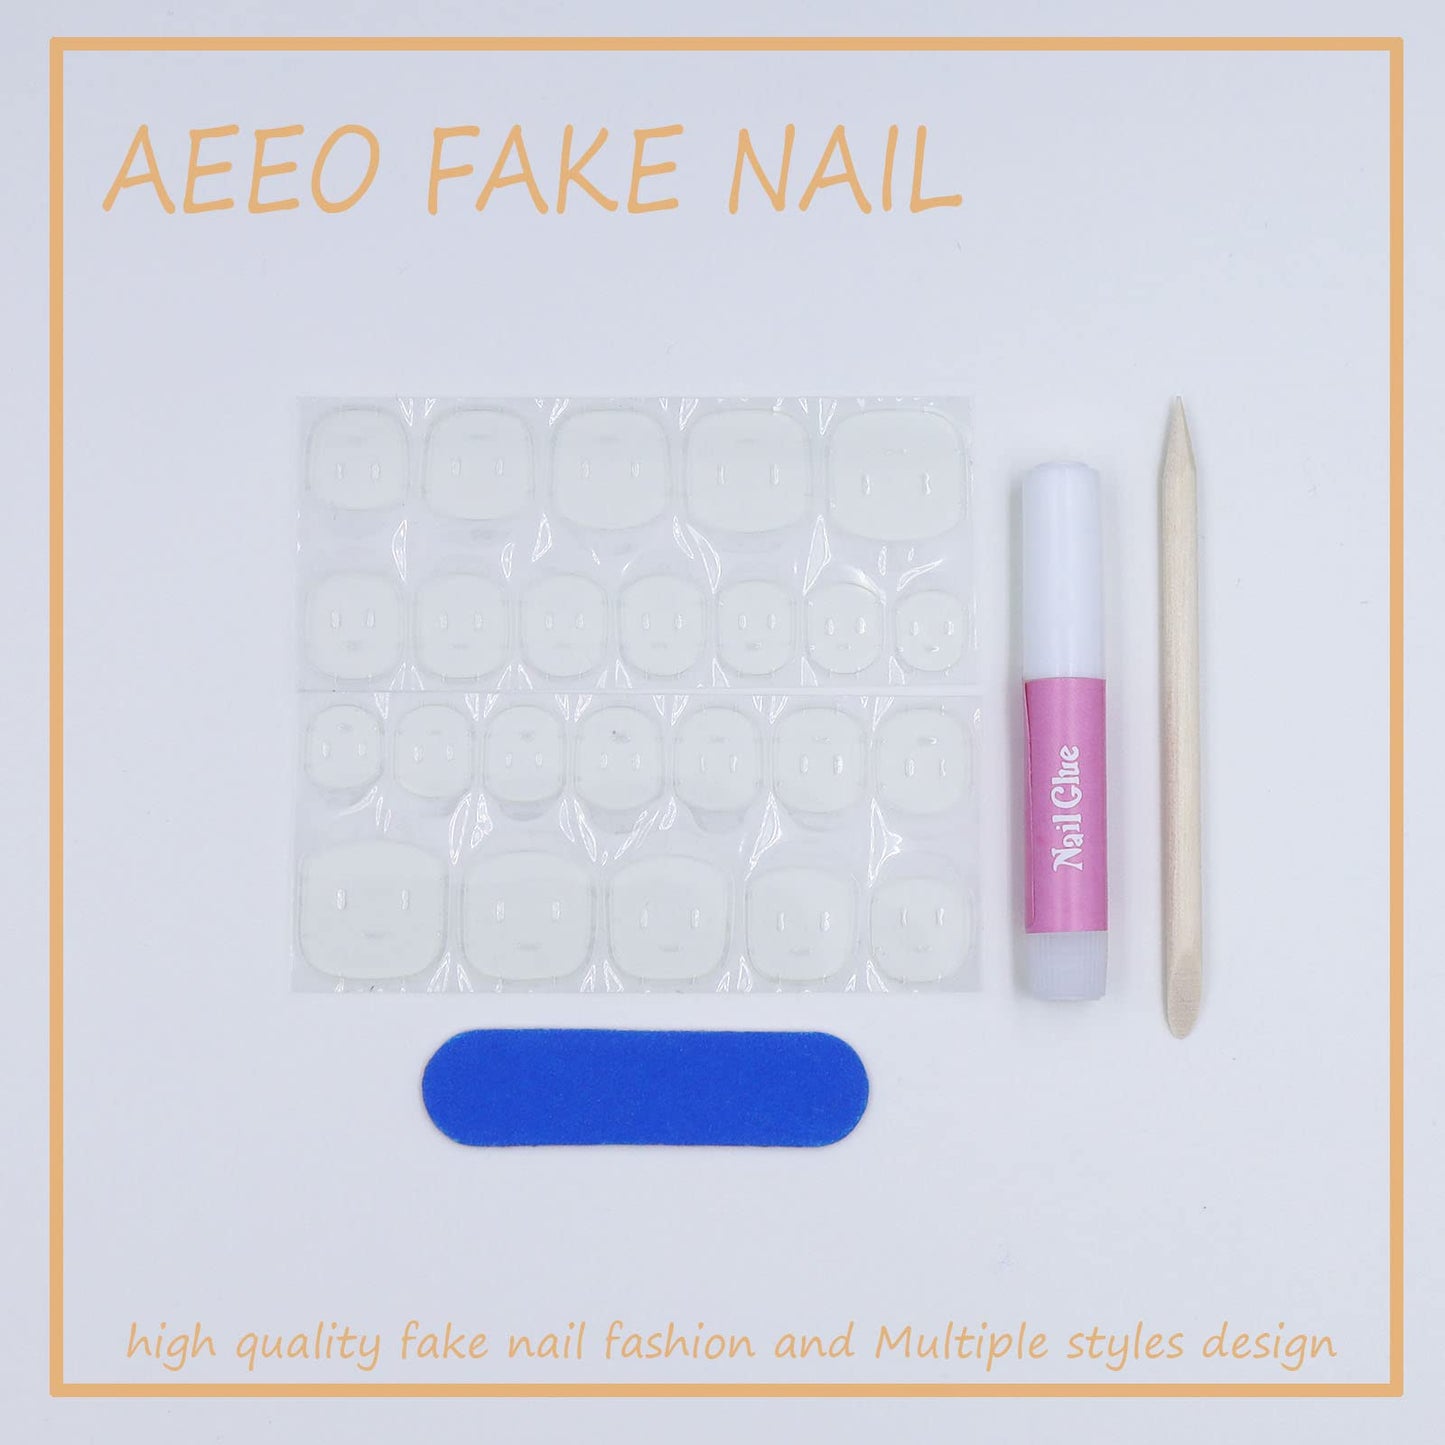 Aeeo Striped Press on Nails Almond Blue Fake Nails Medium Line Art False Nails with Design Glue on Nails Stick on Nails Acrylic Artificial Nails for Women